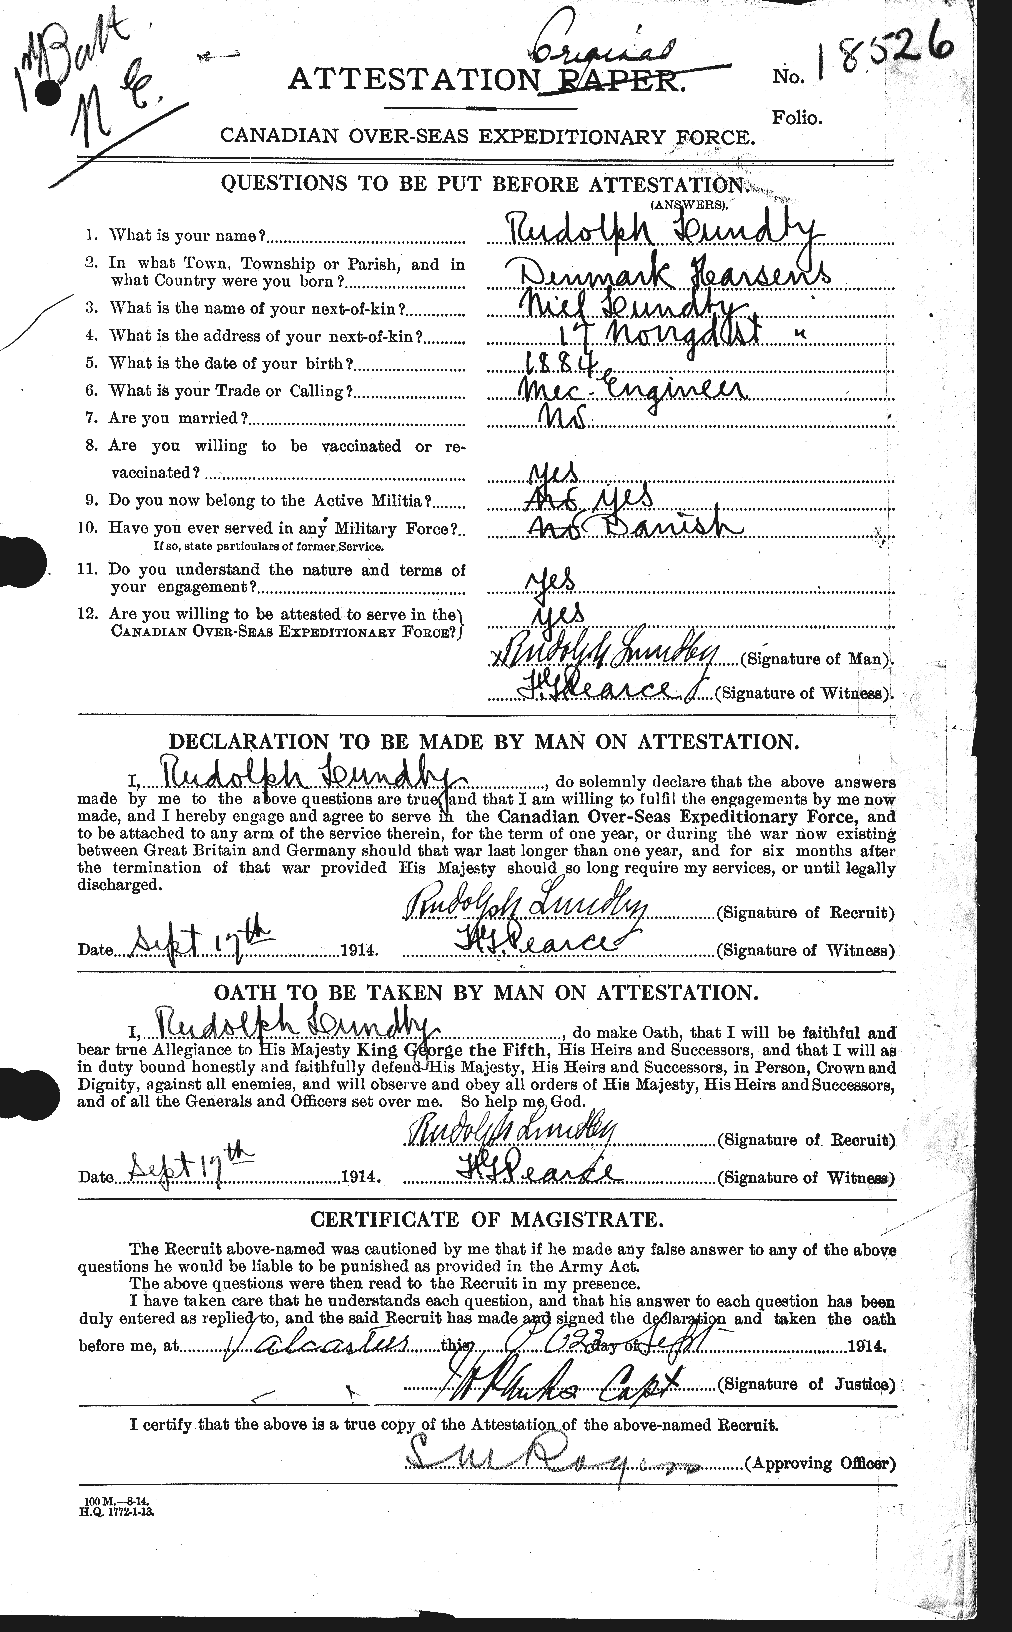 Personnel Records of the First World War - CEF 473272a